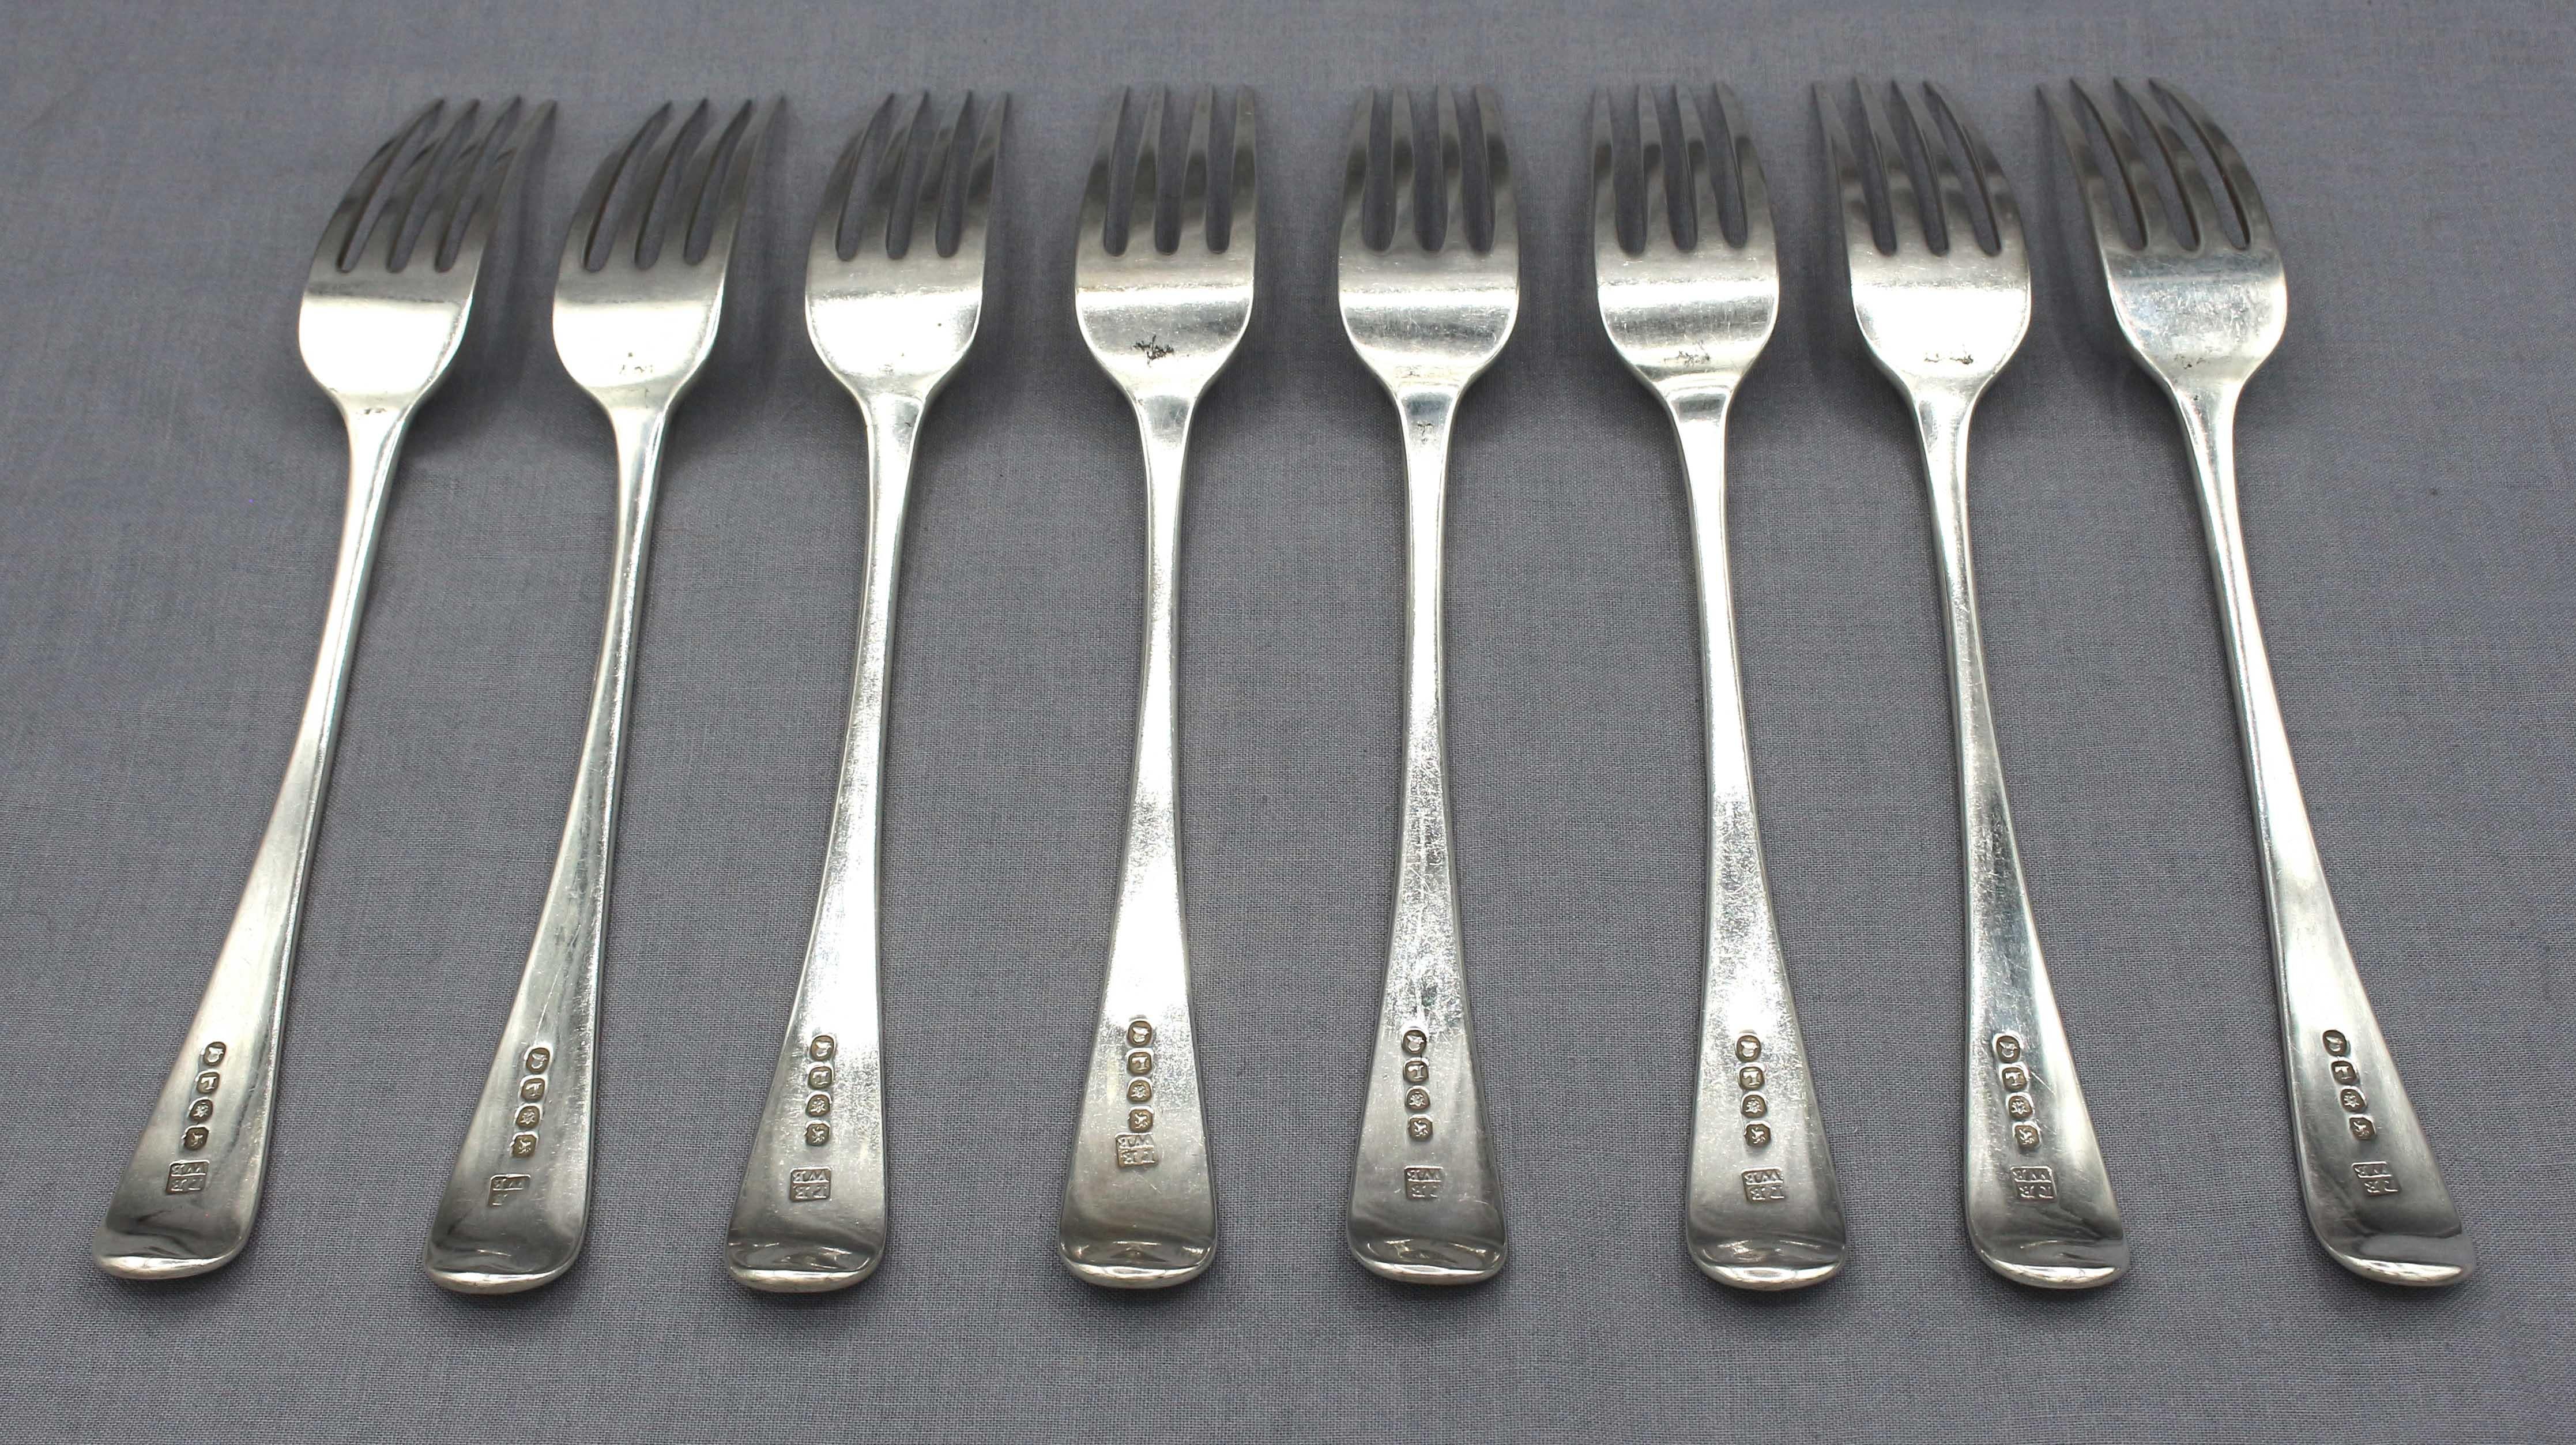 Set of 8 sterling silver dinner forks by Peter & William Bateman, London, 1806. The son and grandson of Hester Bateman. 4-tine forks. Each with crest of a bull passant issuing from a forest. 15.65 troy oz.
8 1/8